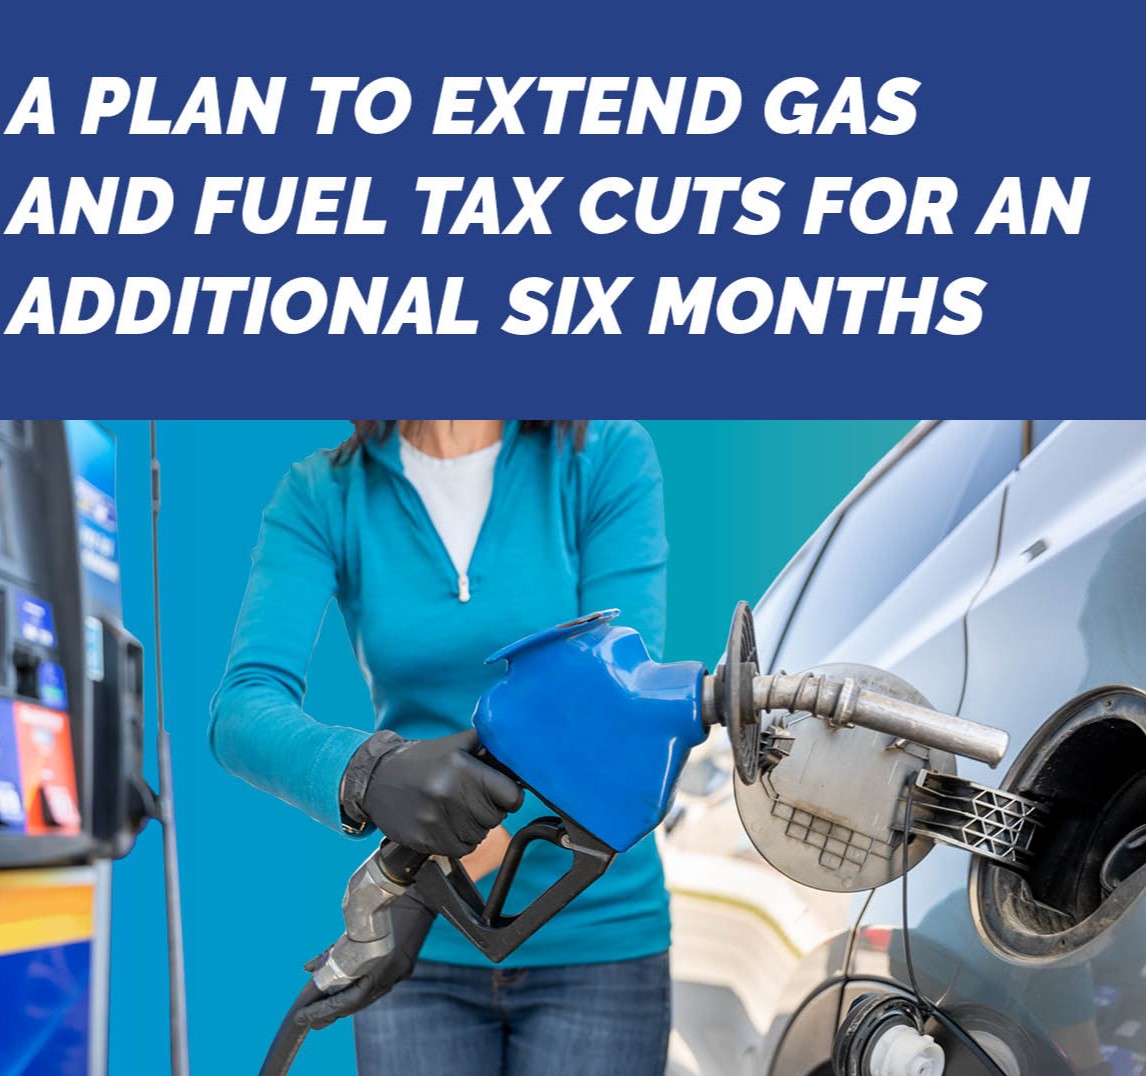 Ontario Extending Gas and Fuel Tax Cuts to June 30, 2024